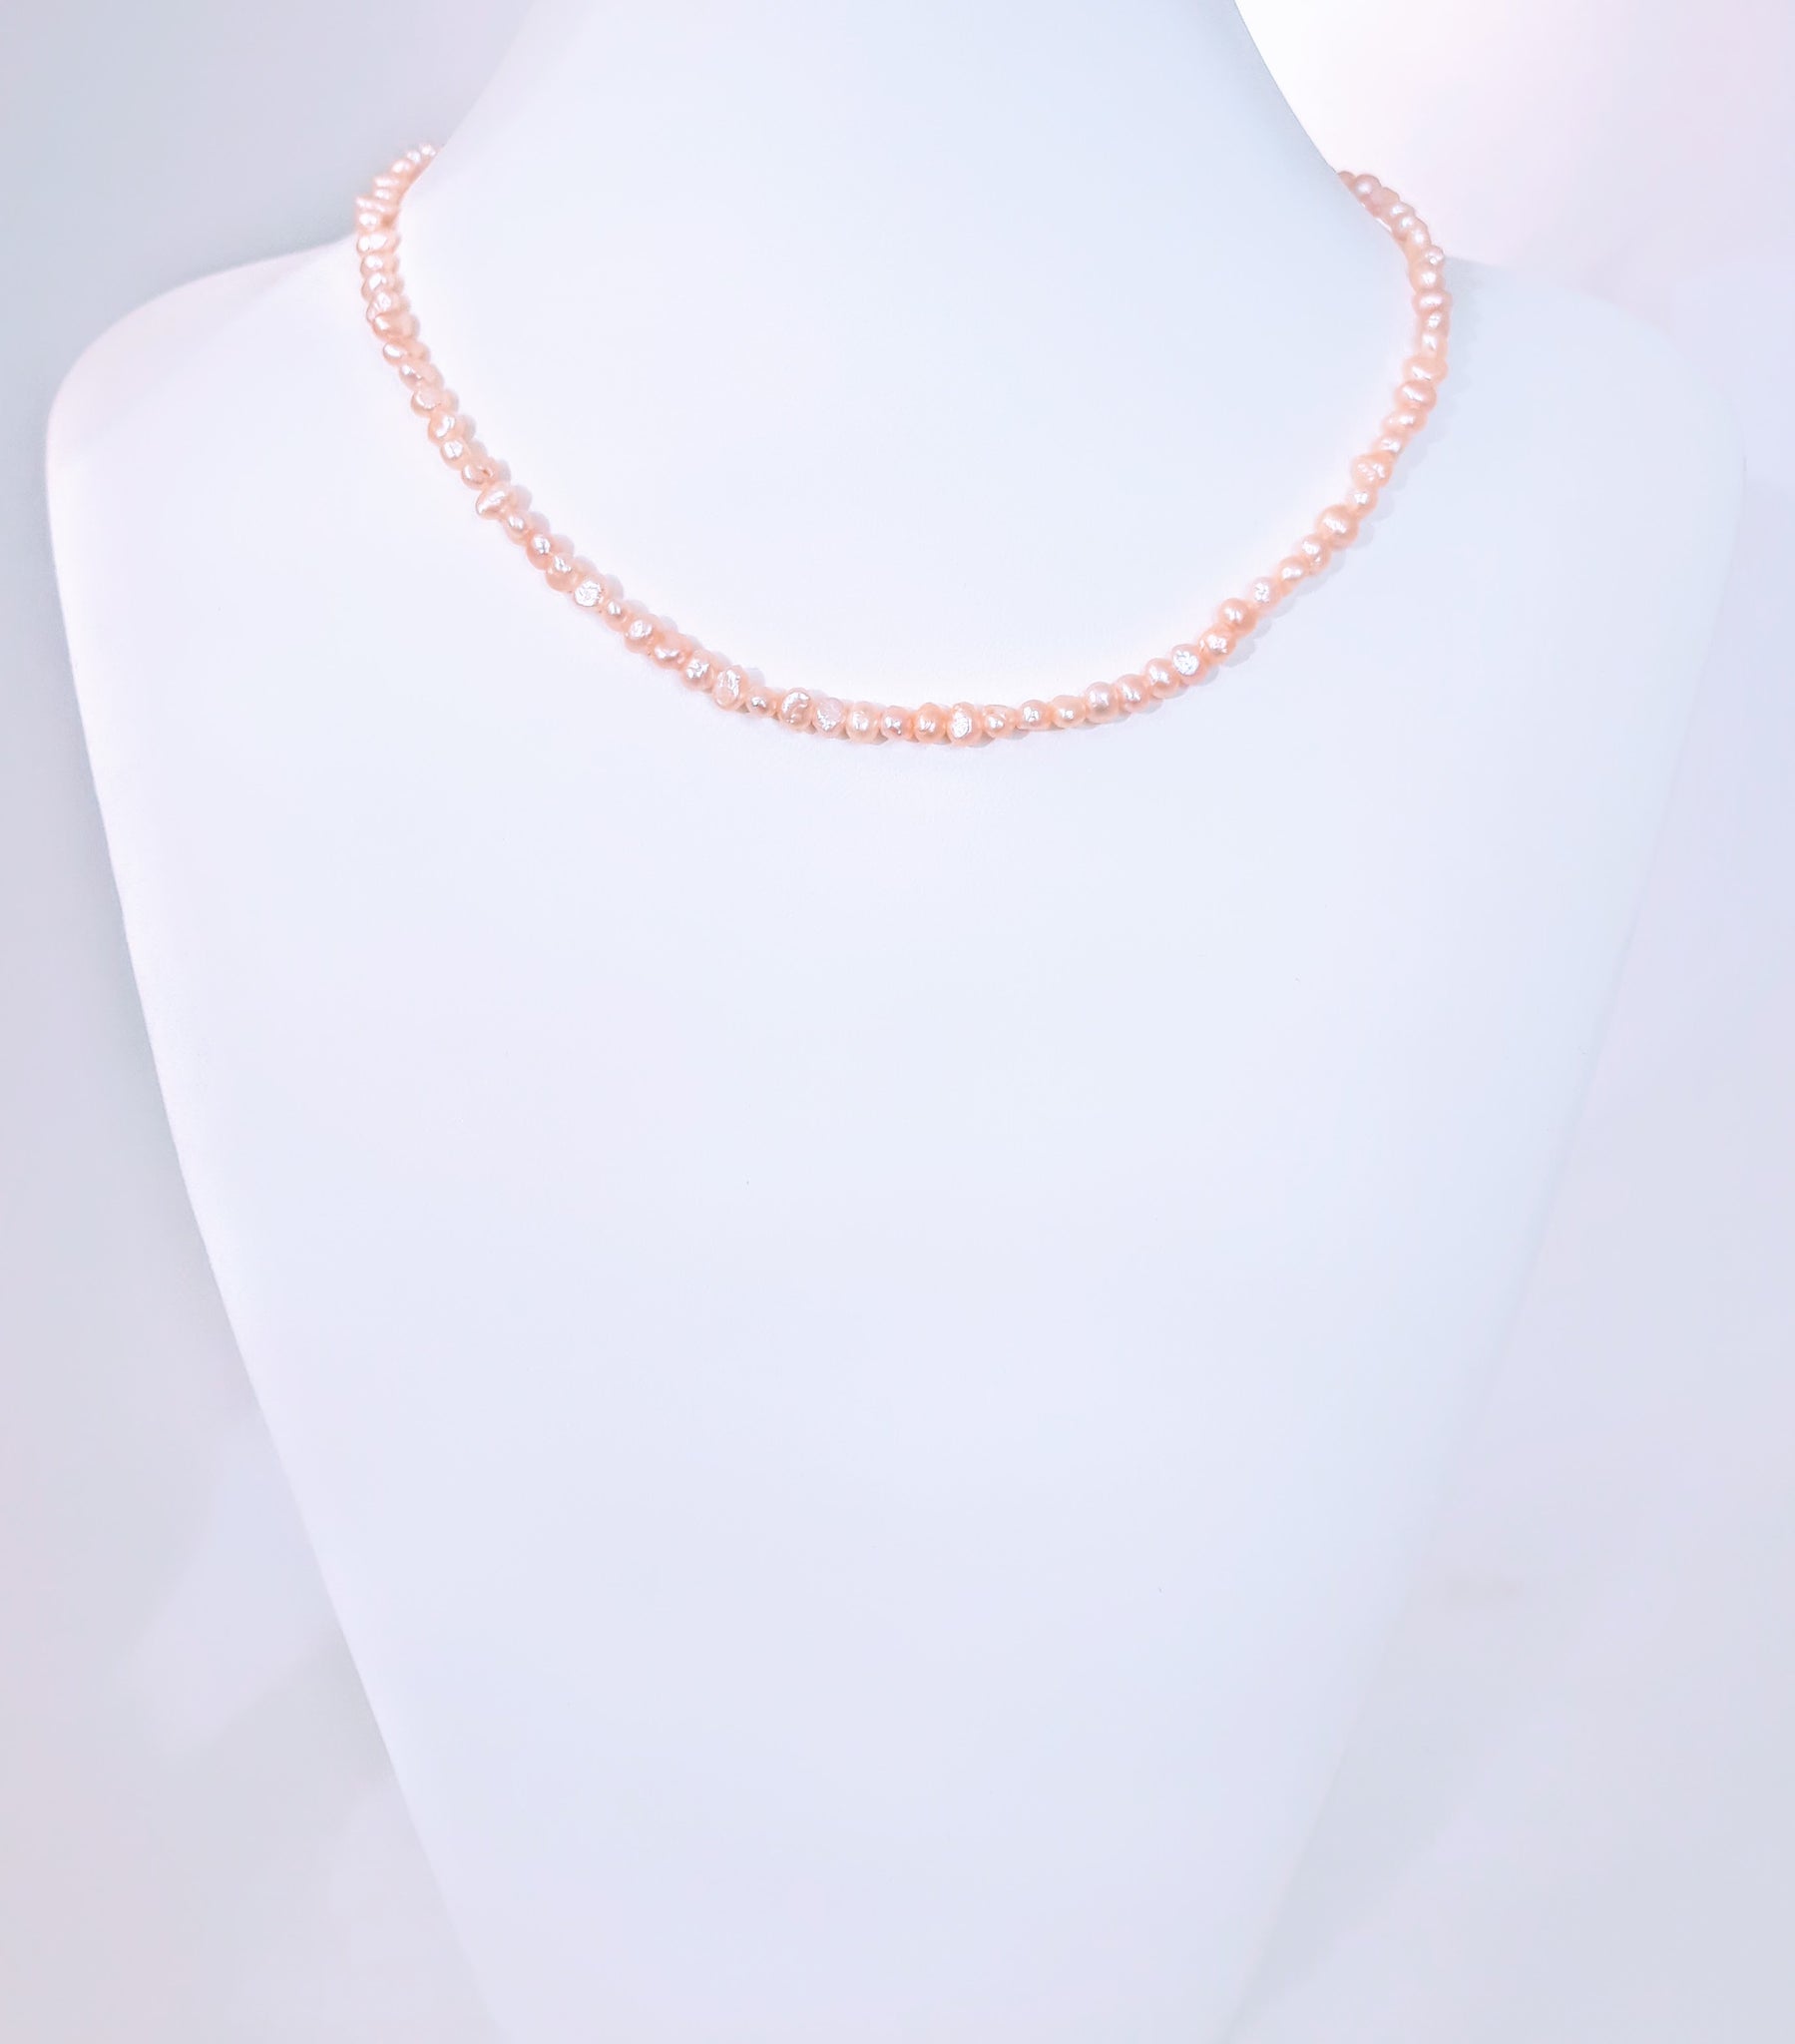 The Petite Pink Freshwater Pearl